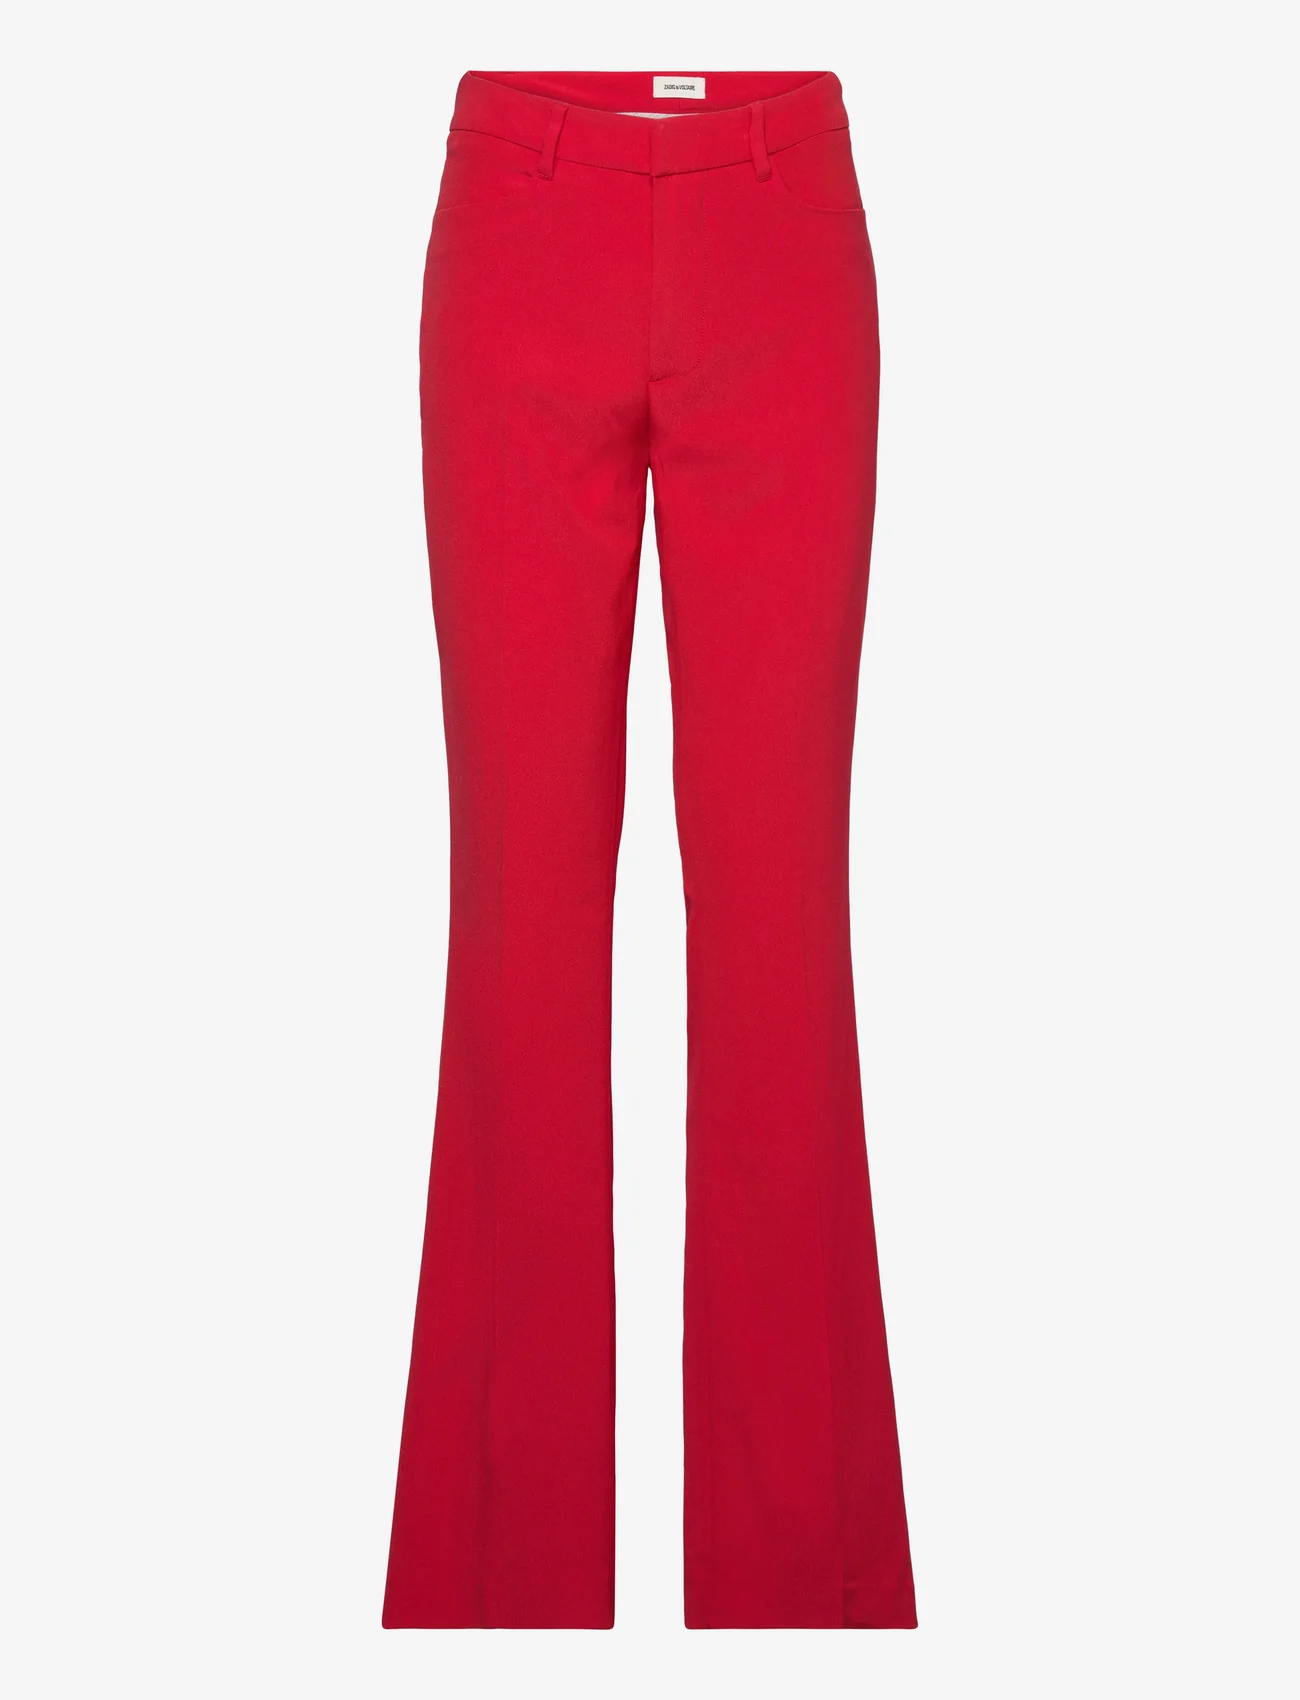 Zadig & Voltaire - PISTOL CREPE - tailored trousers - japon - 0